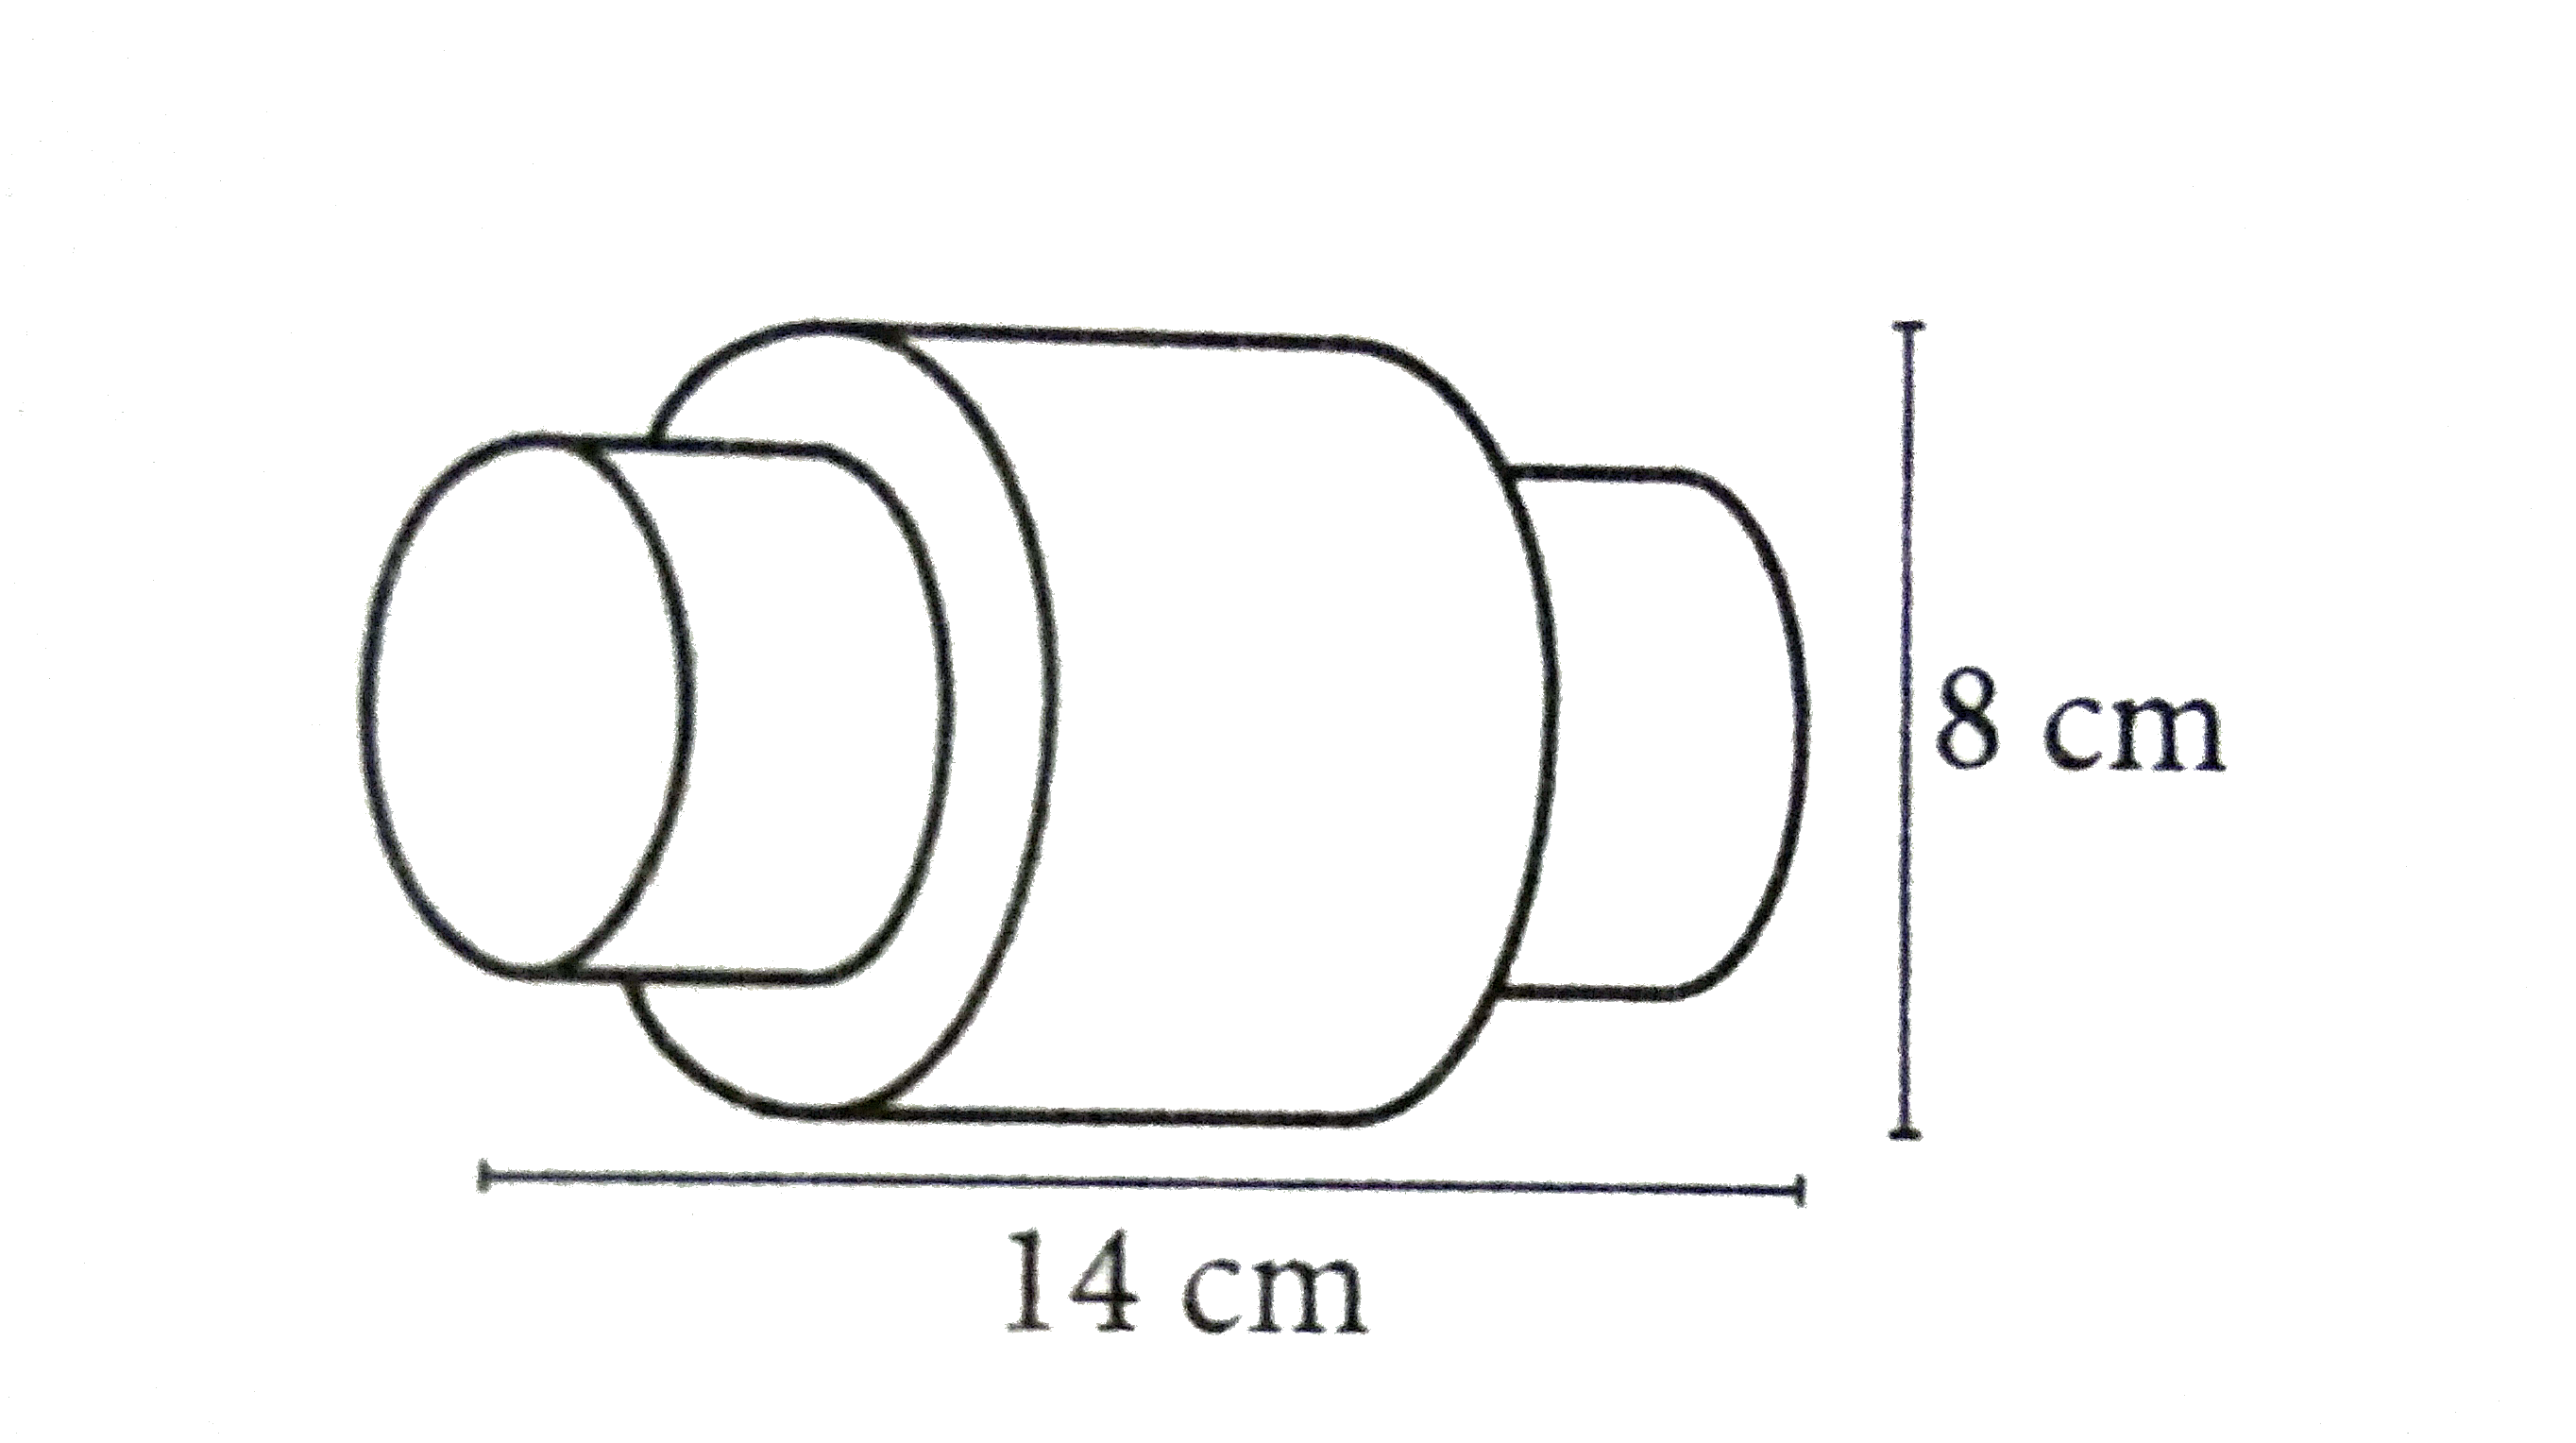 A locking pin is often made using a cylinder-cylinder pair in which a narrow cylinder fits tightly inside a wider cylinder. The inner cylinder protrudes from the outer cylinder, usually by equal amounts on both ends. In the diagram above, the radius of the inner cylinder is half the radius of the outer cylinder by 4 centimeters on each end. What is the volume of the locking pin ? Round your answer to the nearest cubic centimeter.